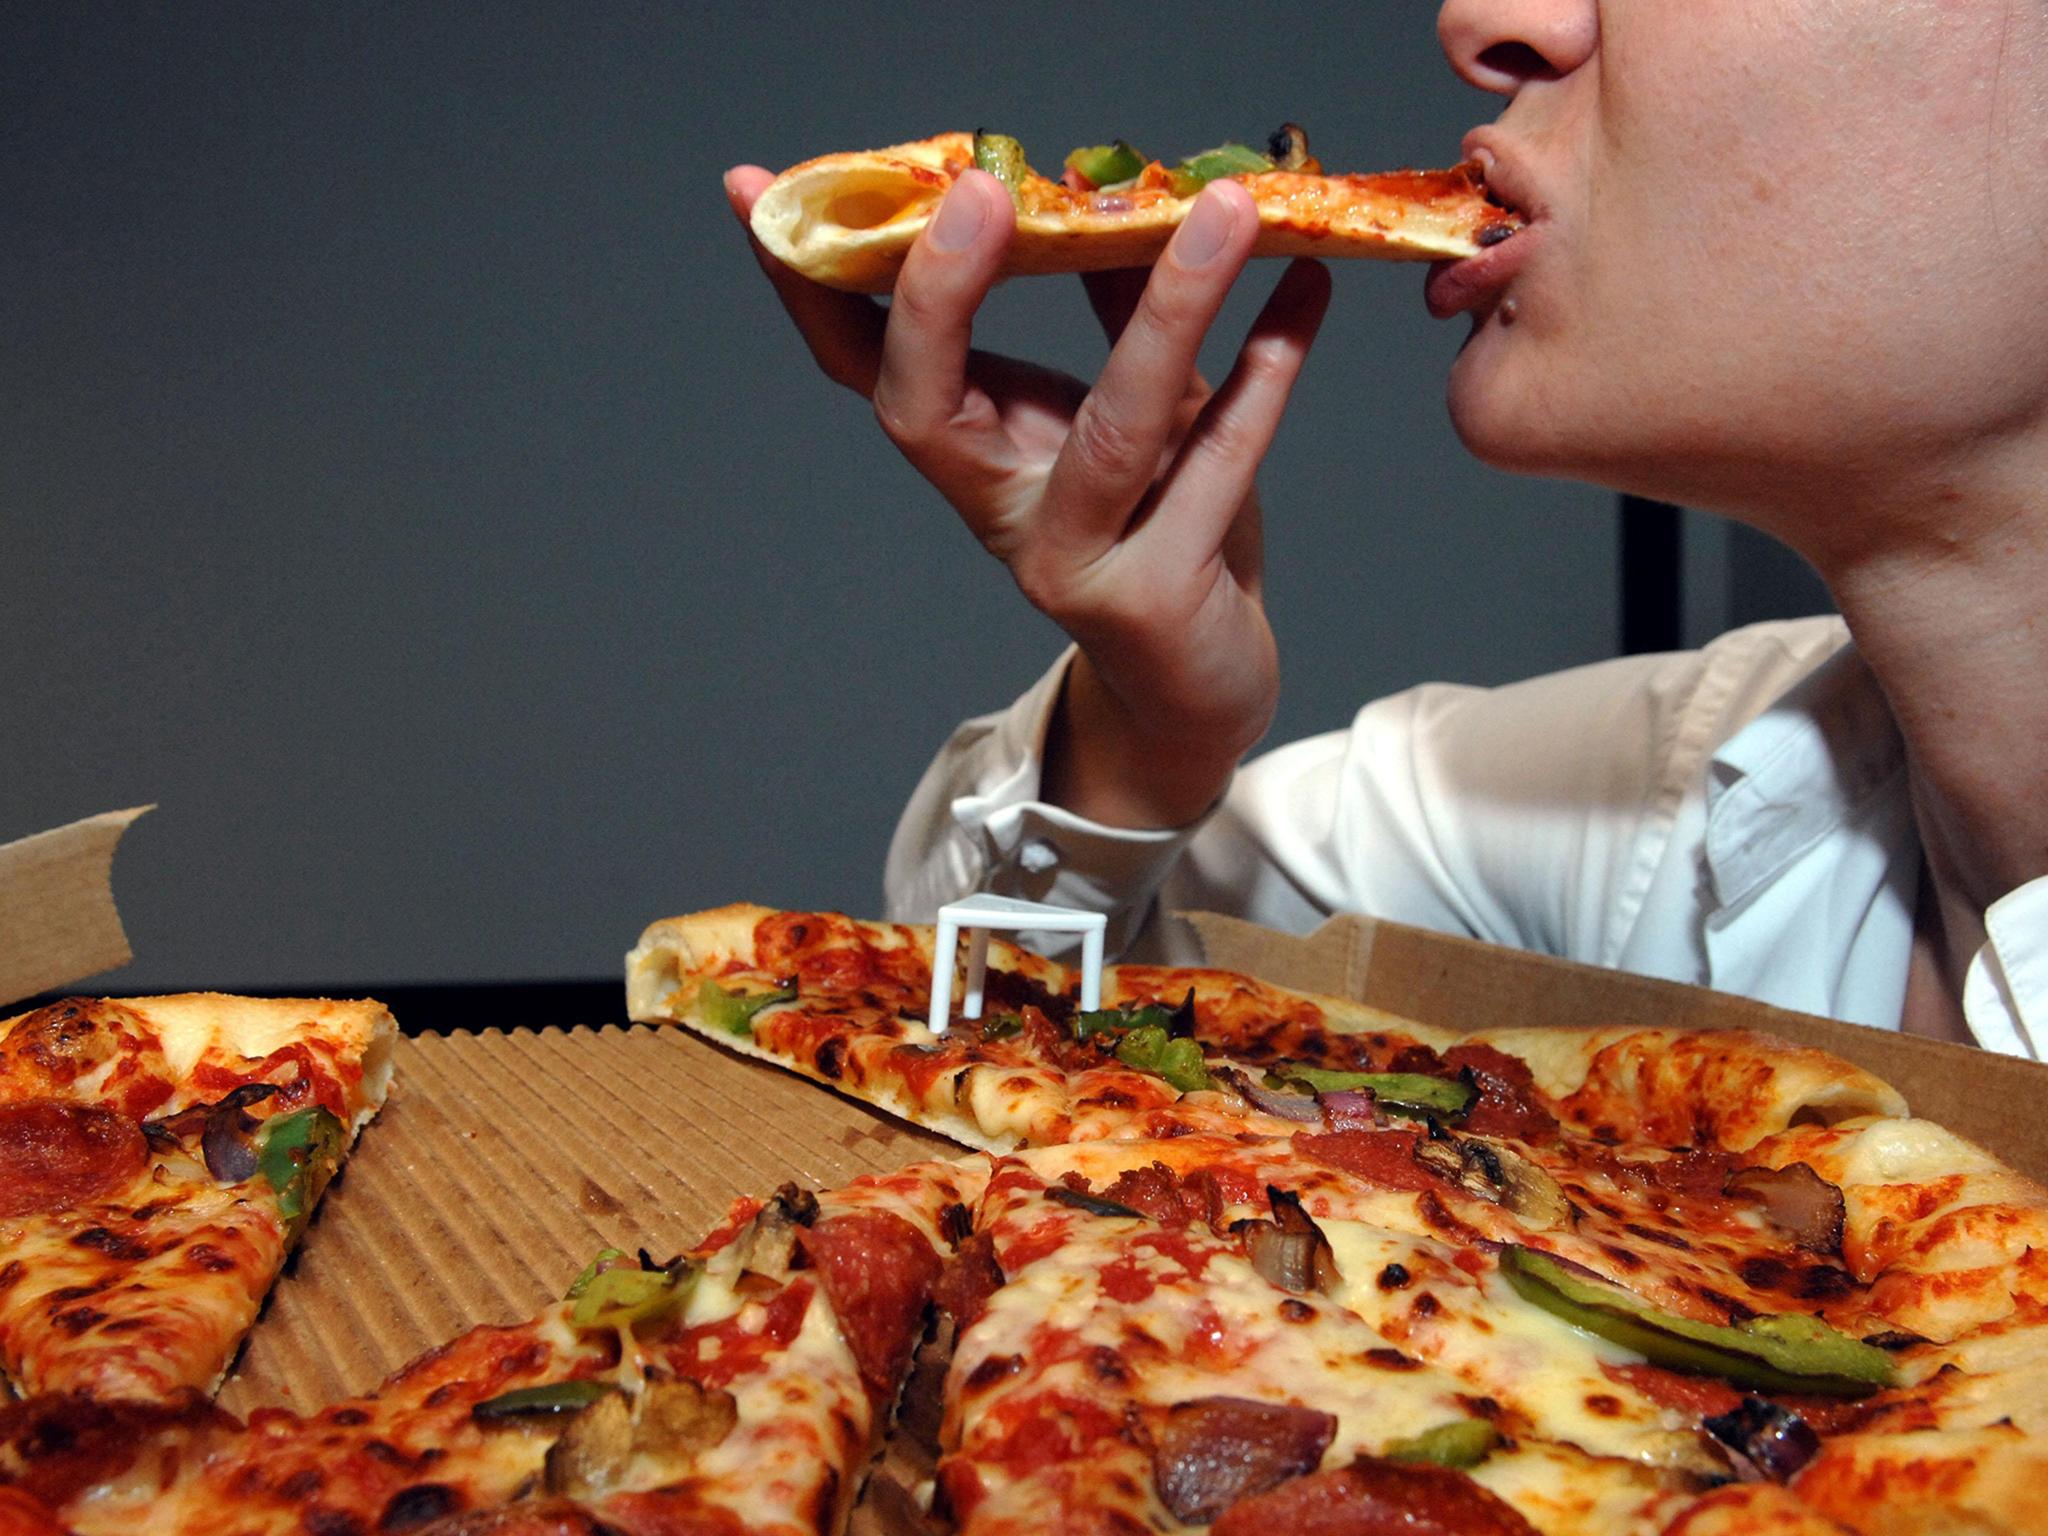 ‘Emotional eating’ can have a negative impact on our health